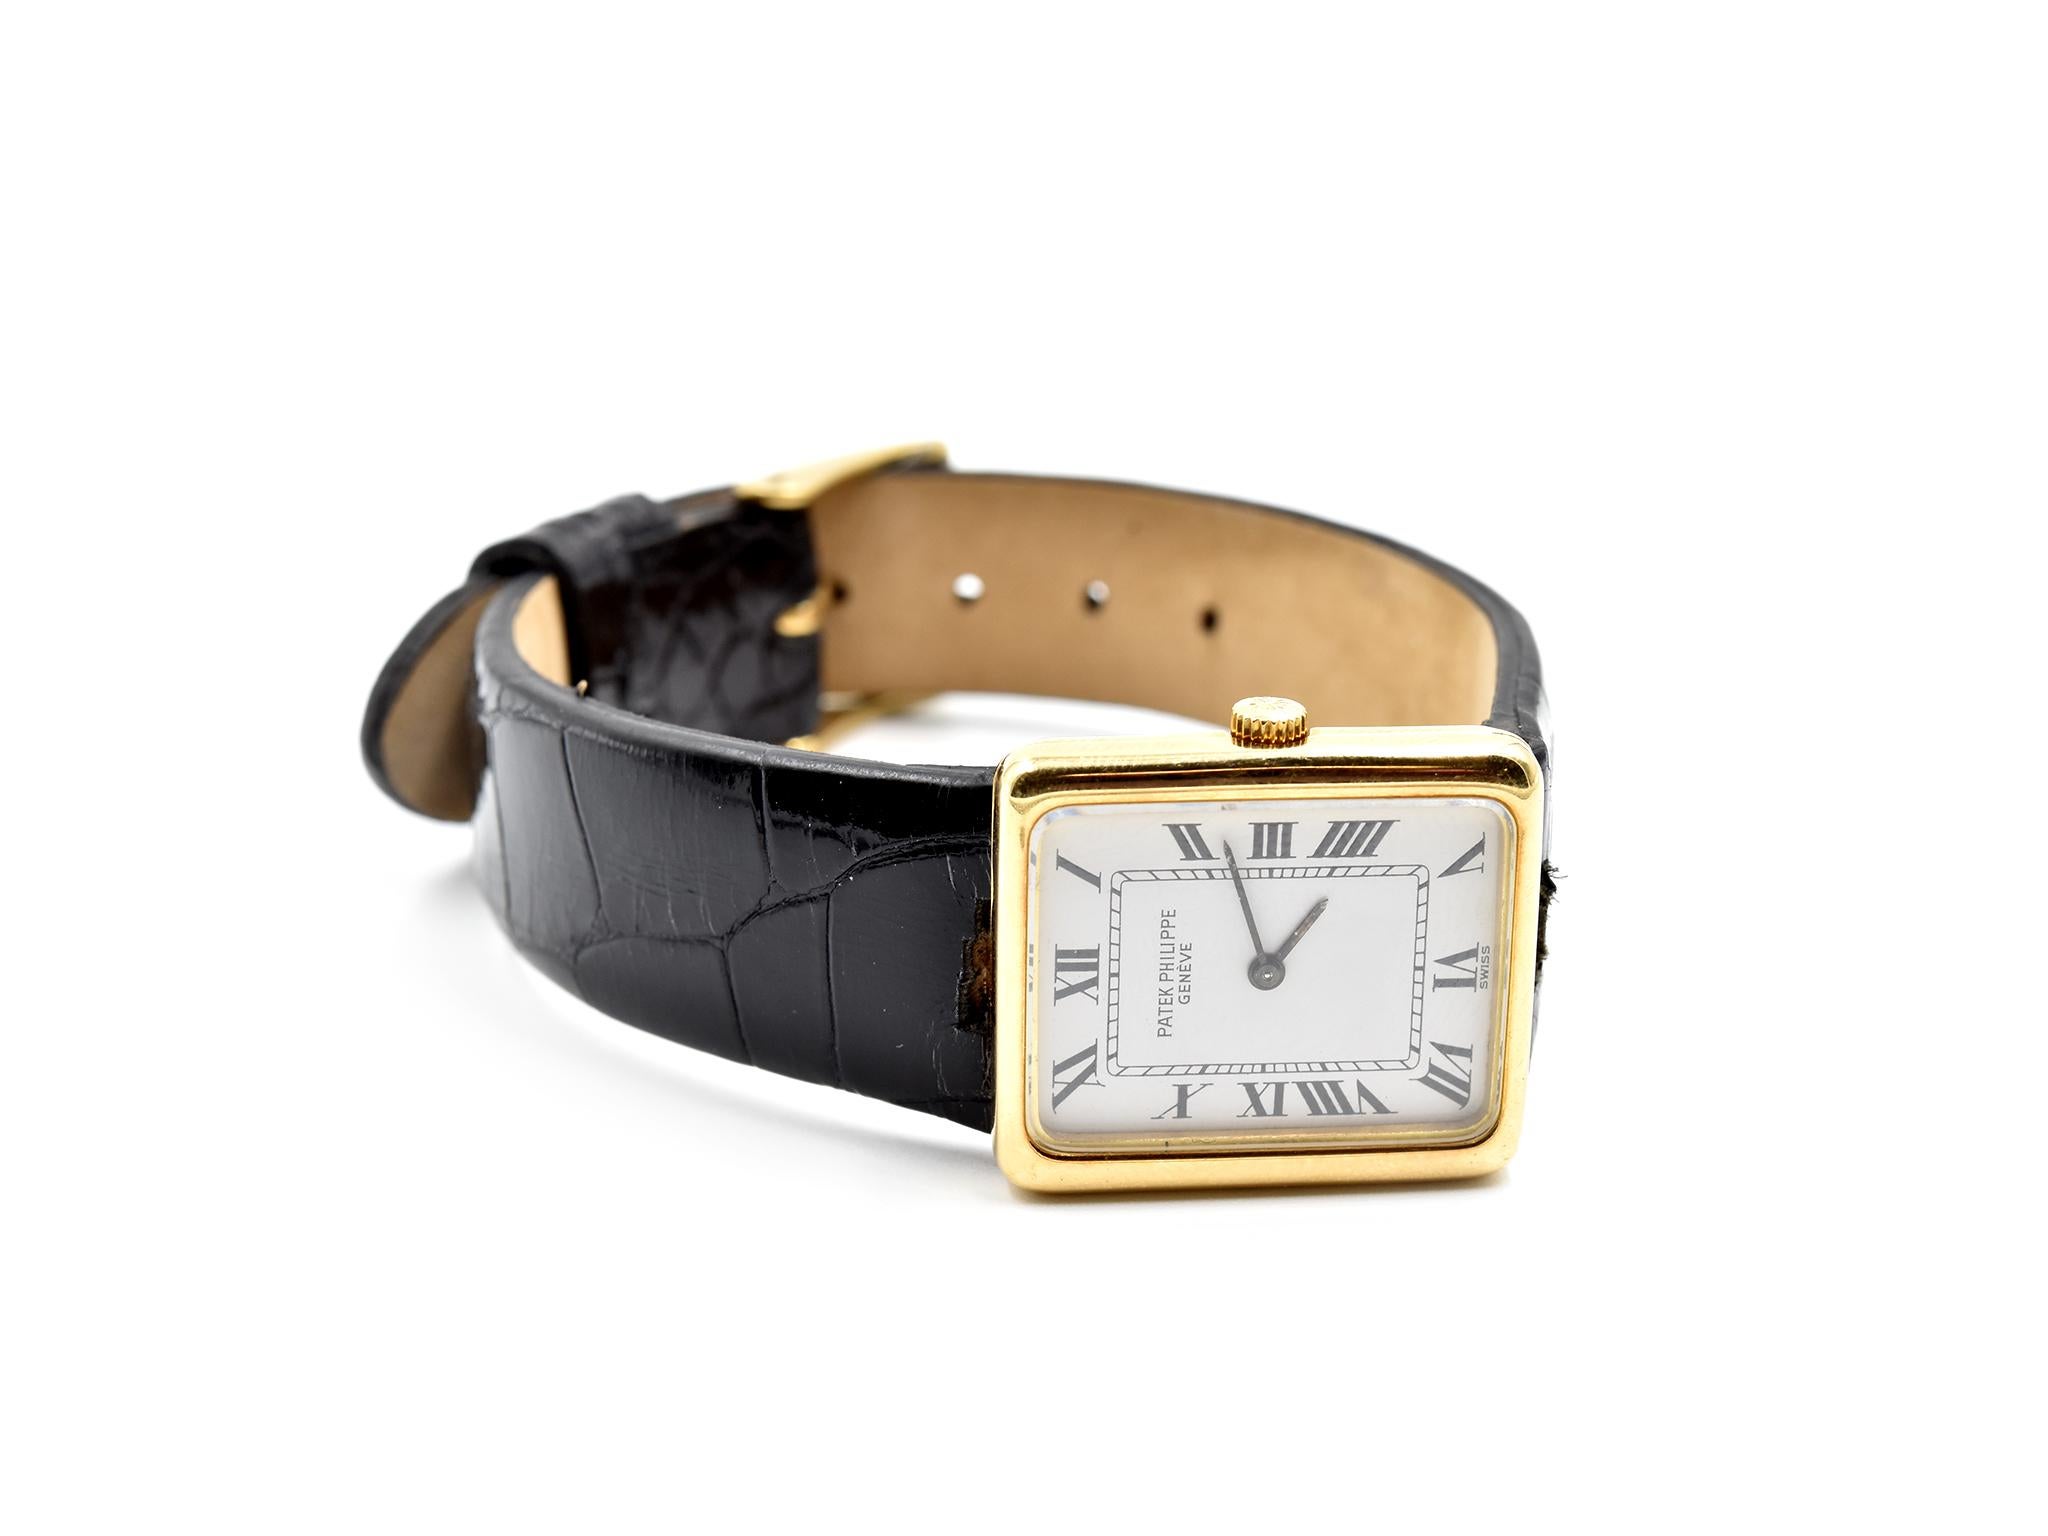 Movement: manual wind
Function: hours, minutes
Case: rectangular 25.00mm x 22.00mm 18k yellow gold case with fixed bezel, sapphire crystal, winding crown, solid case
Dial: white roman numeral dial with black hands, black indexes
Serial #: